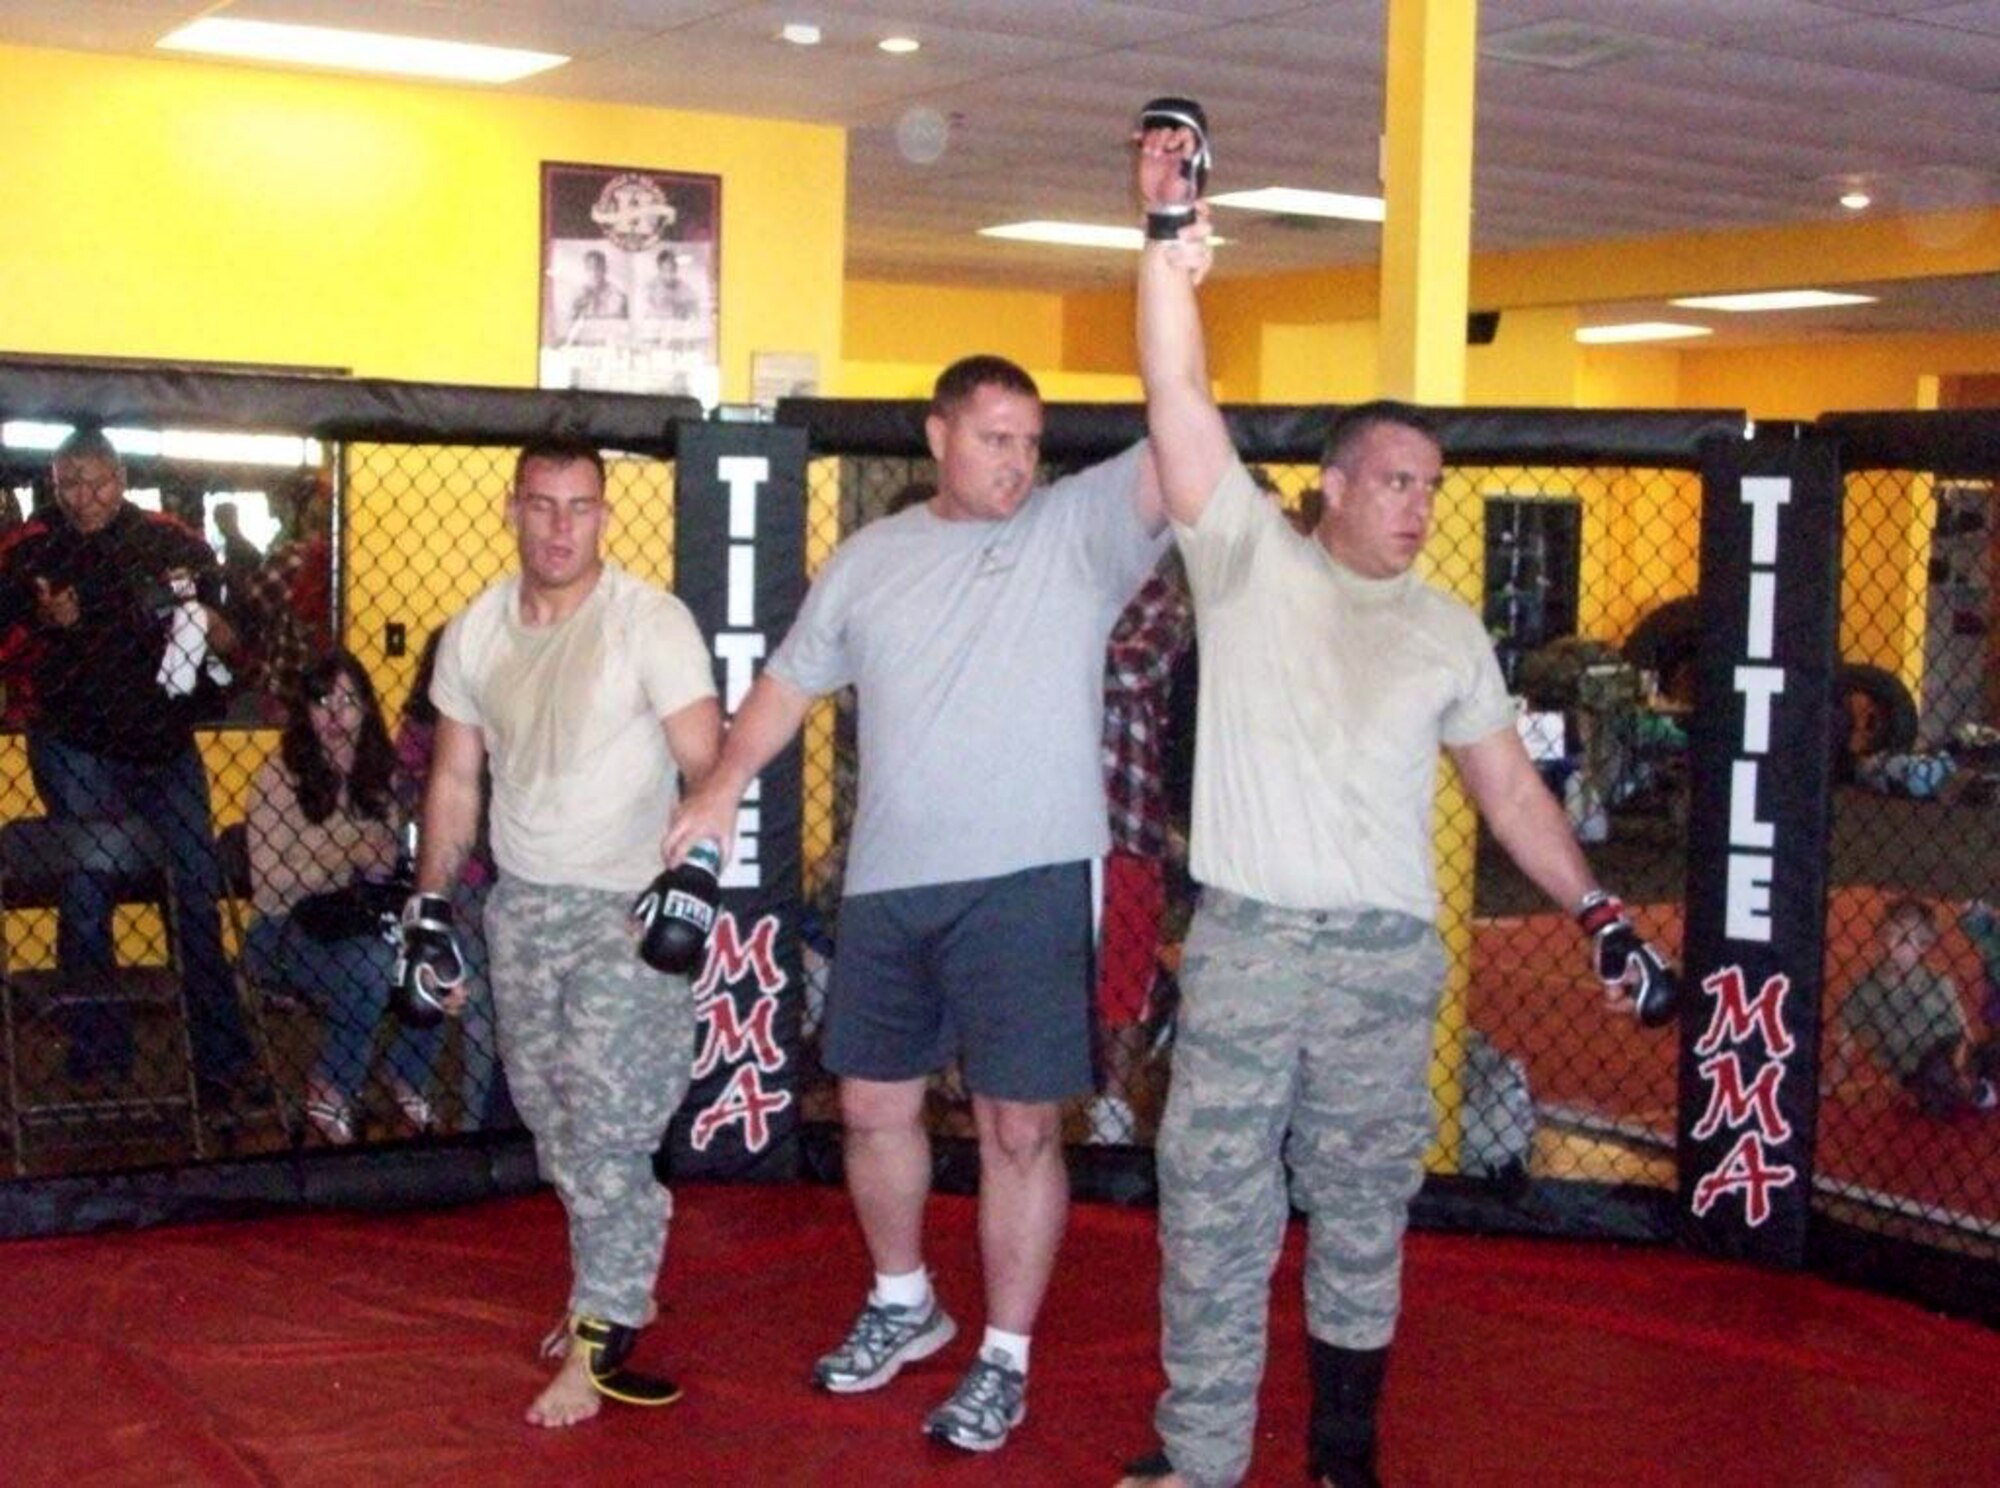 Senior Airman Ed Small, right is declared the victor in his final Mixed Martial Arts match at the Arizona National Guard Combatives Team tryouts Jan. 15. He won a place on the team and the light heavyweight division at 205 pounds. Small, an aircraft maintainer at the 162nd Fighter Wing, was the only Airman at the tryouts. (U.S. Air Force photo/Master Sgt. Dave Morgan)